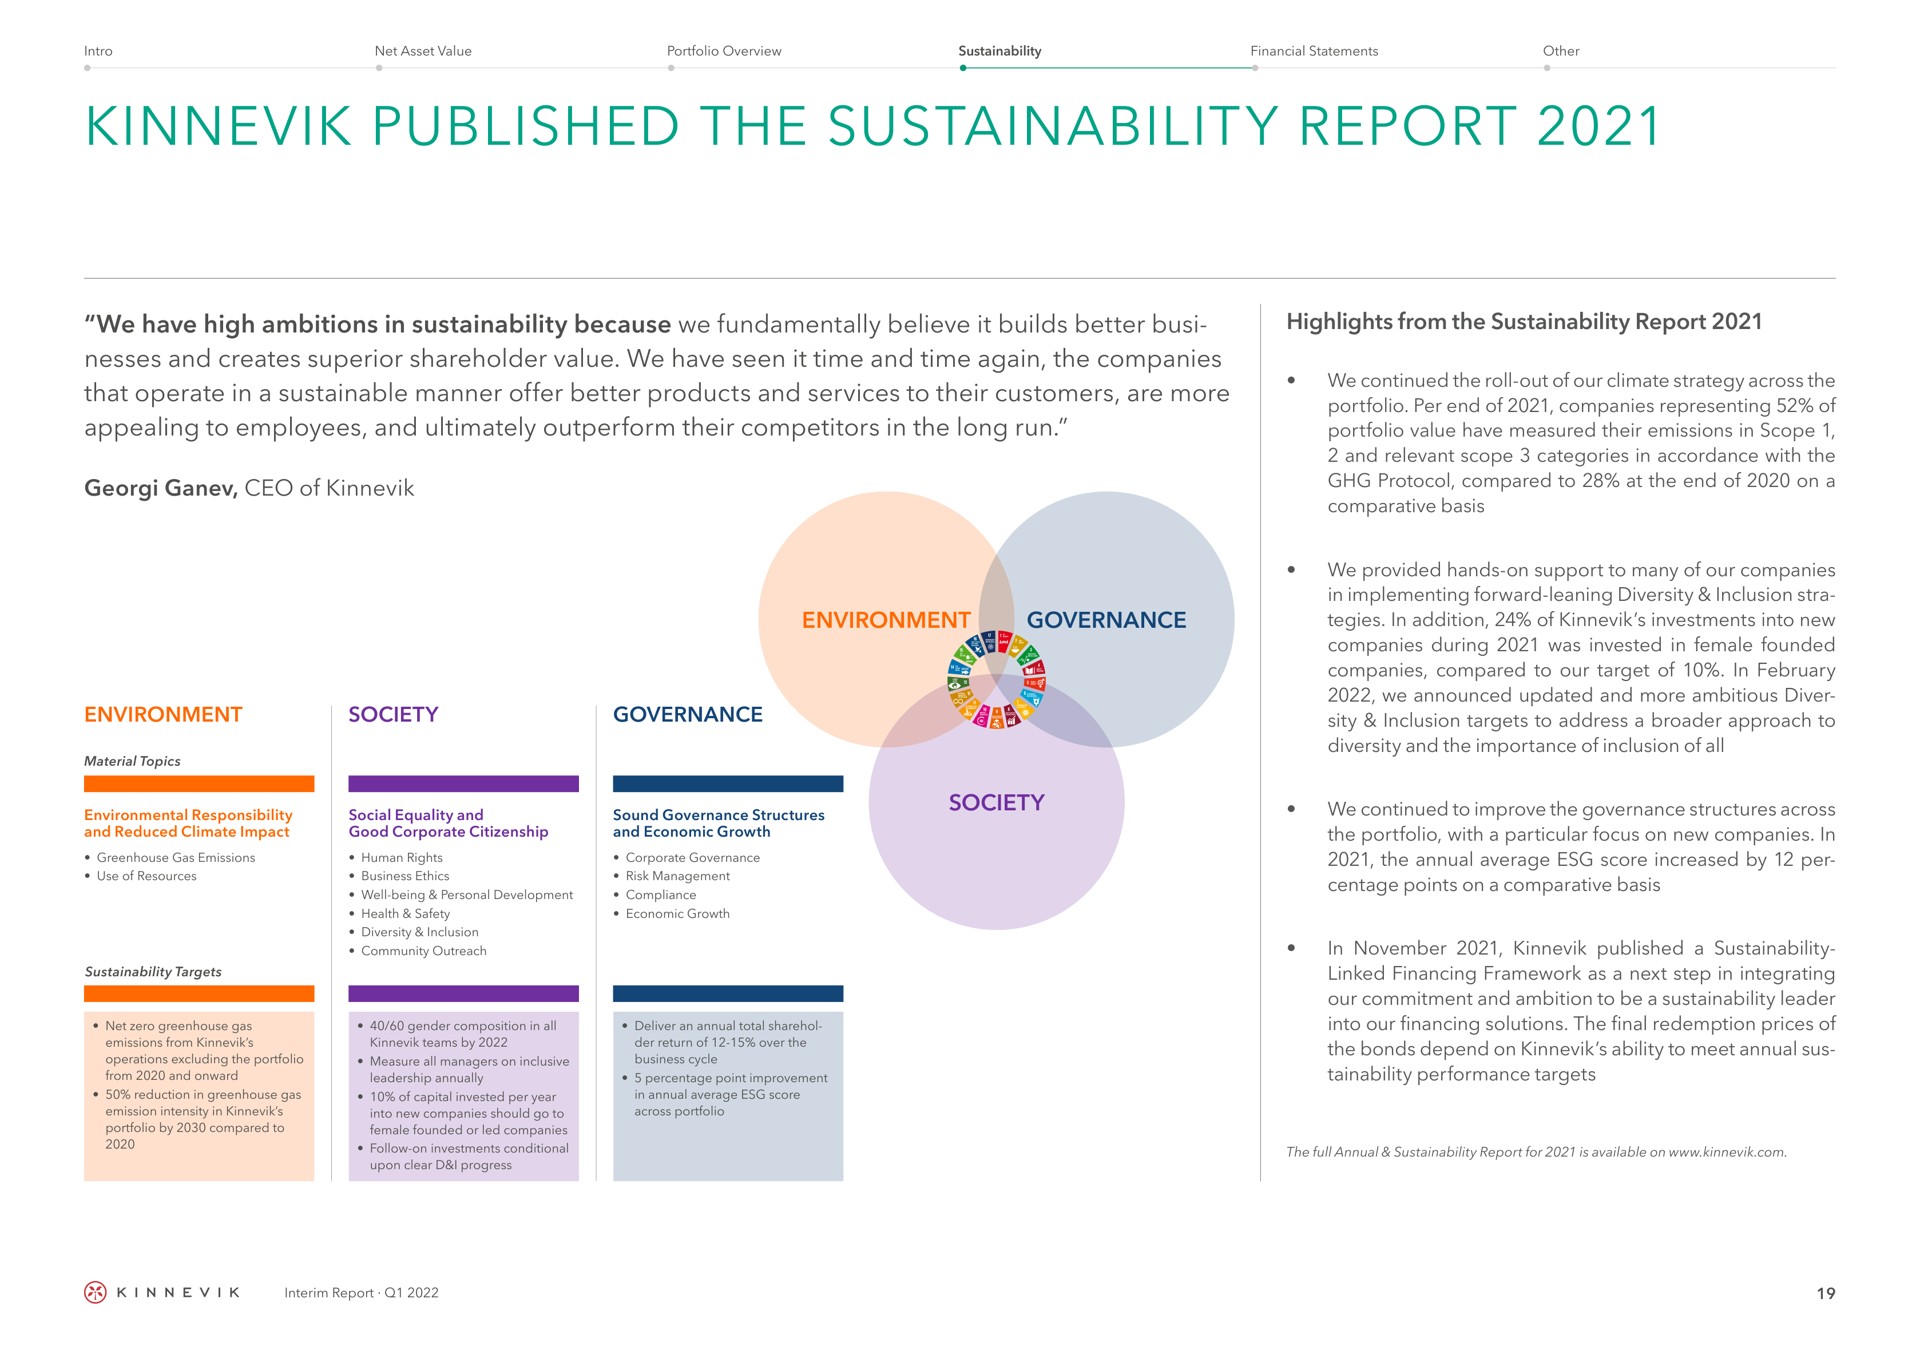 published the report we have high ambitions in because we fundamentally believe it builds better nesses and creates superior shareholder value we have seen it time and time again the companies that operate in a sustainable manner offer better products and services to their customers are more appealing to employees and ultimately outperform their competitors in the long run of environment governance environment society governance society highlights from the report we continued the roll out of our climate strategy across the portfolio per end of companies representing of portfolio value have measured their emissions in scope and relevant scope categories in accordance with the protocol compared to at the end of on a comparative basis we provided hands on support to many of our companies in implementing forward leaning diversity inclusion stra in addition of investments into new companies during was invested in female founded companies compared to our target of in we announced updated and more ambitious diver inclusion targets to address a approach to diversity and the importance of inclusion of all we continued to improve the governance structures across the portfolio with a particular focus on new companies in the annual average score increased by per centage points on a comparative basis in published a linked financing framework as a next step in integrating our commitment and ambition to be a leader into our financing solutions the final redemption prices of the bonds depend on ability to meet annual performance targets ona interim | Kinnevik